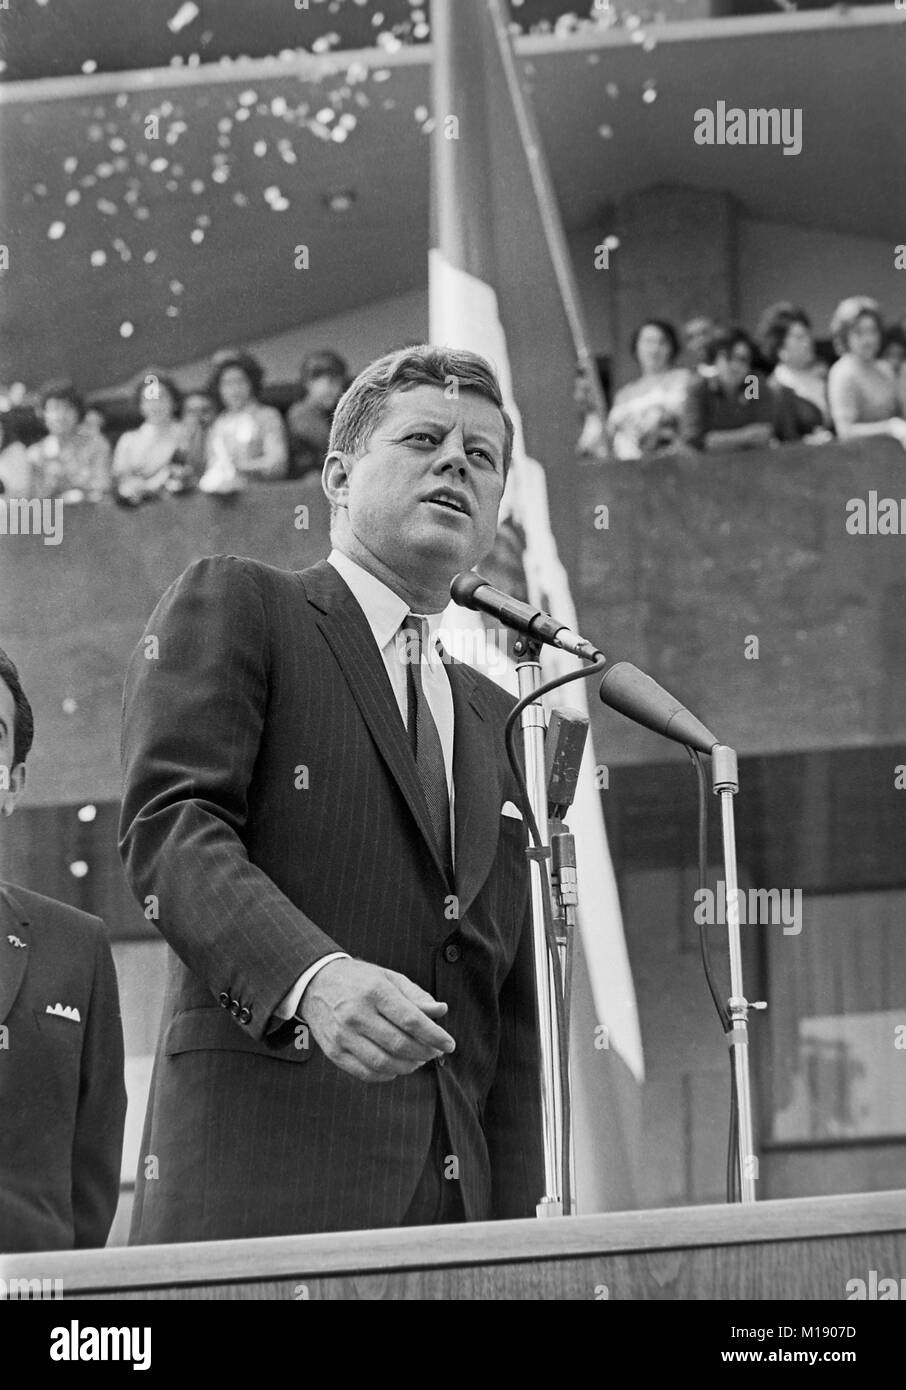 President John F. Kennedy (at microphones) delivers remarks to the crowd during his visit to the Unidad Independencia (Independencia Housing Project) in Mexico City, Mexico.  June 30,1962 Stock Photo